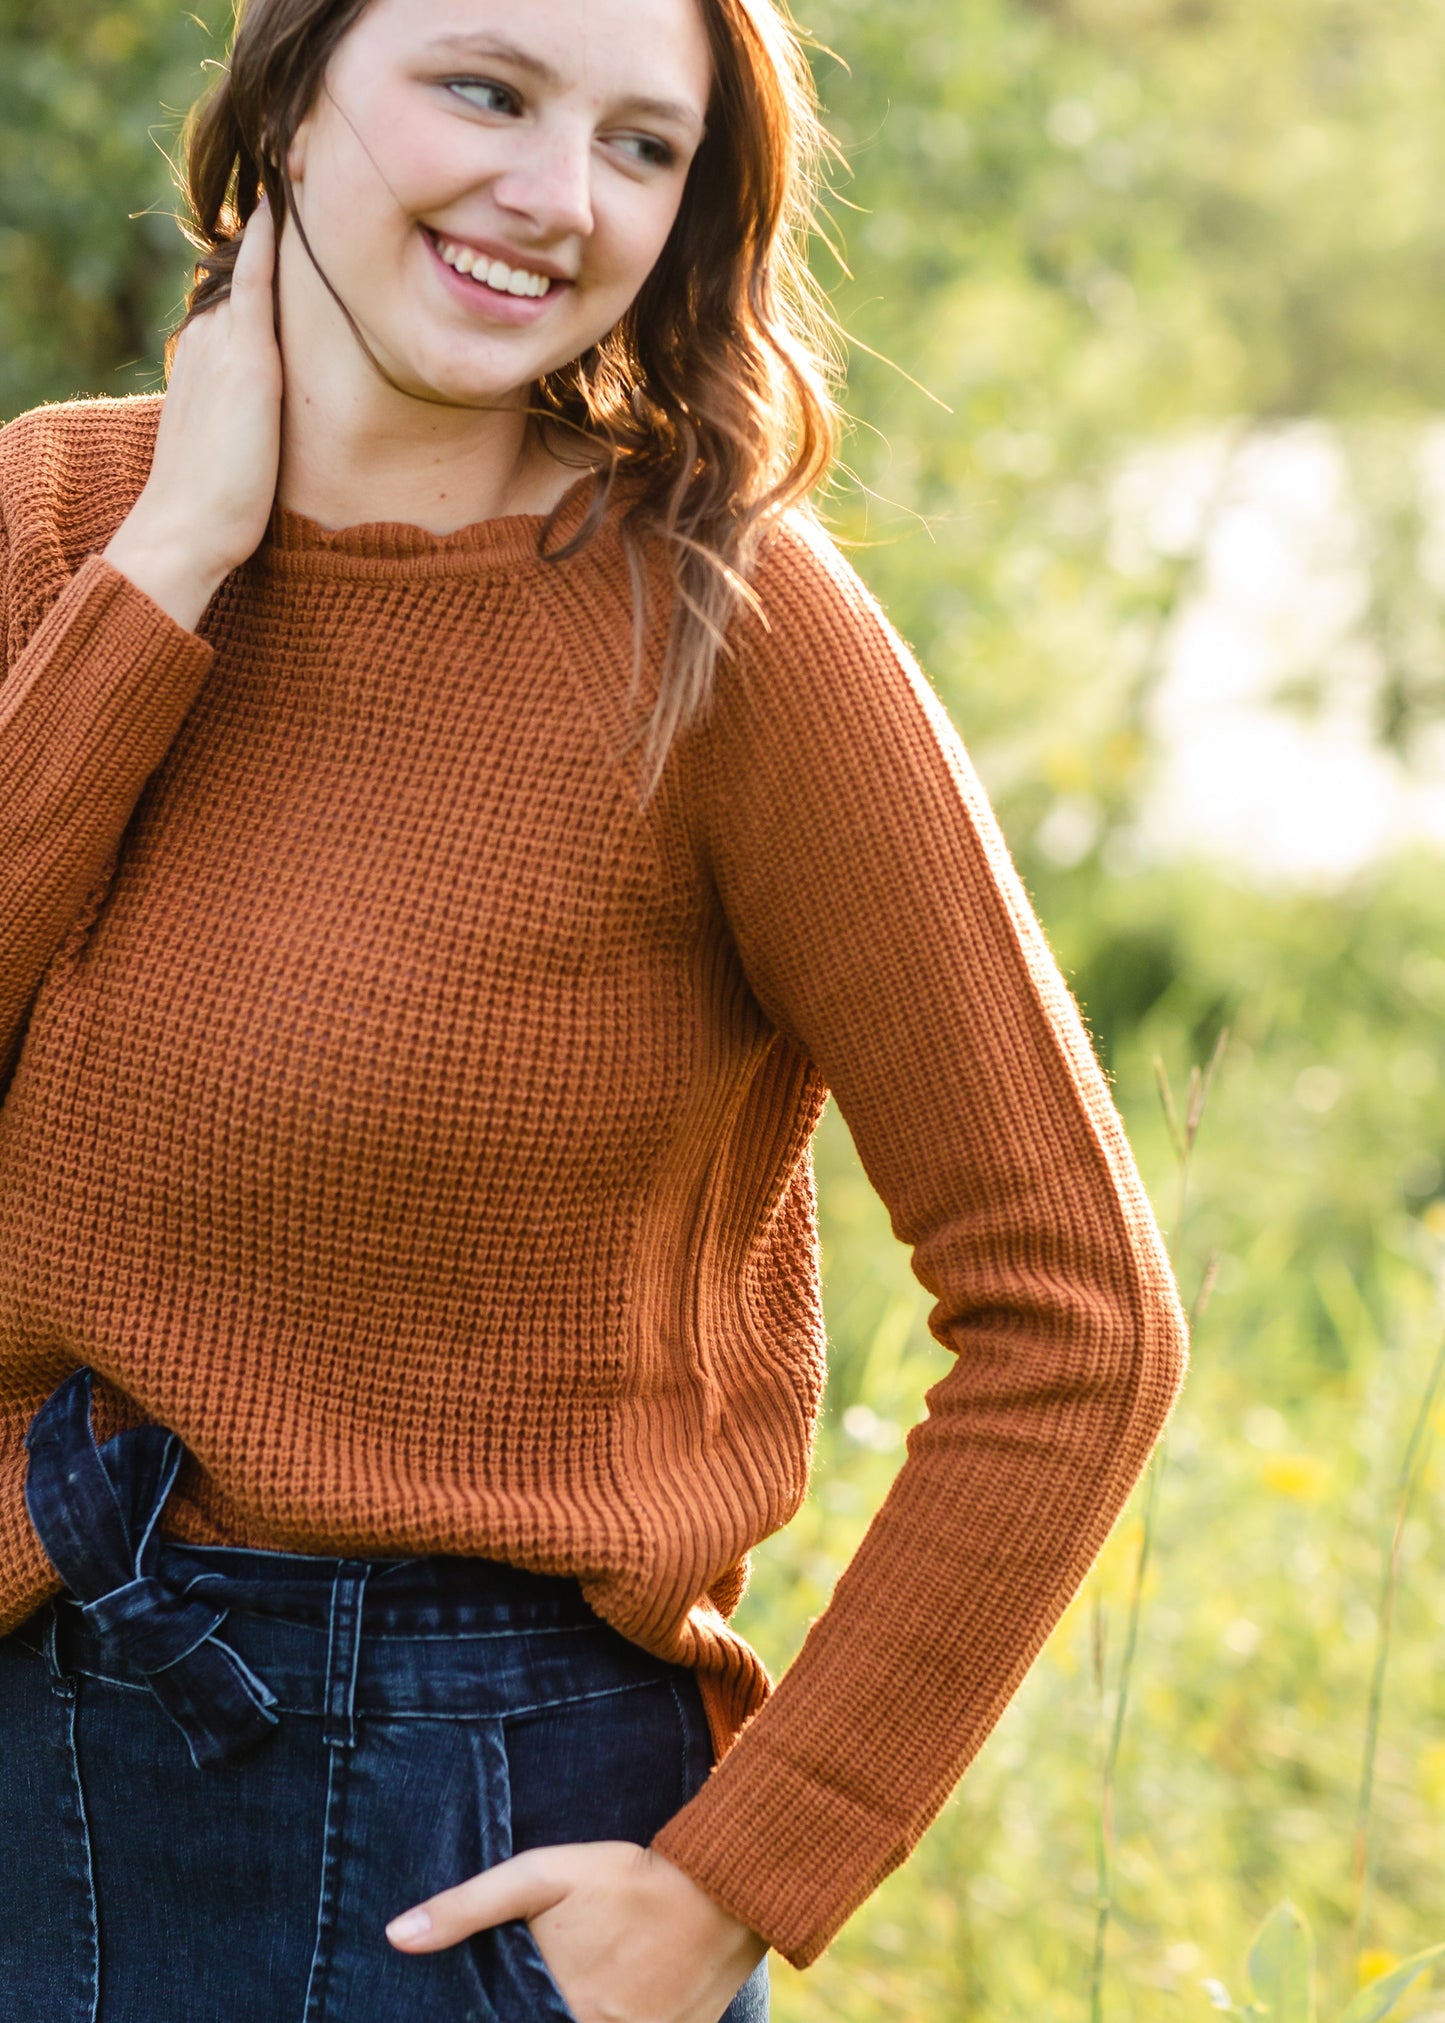 Rust Knit Crocheted Sweater Tops